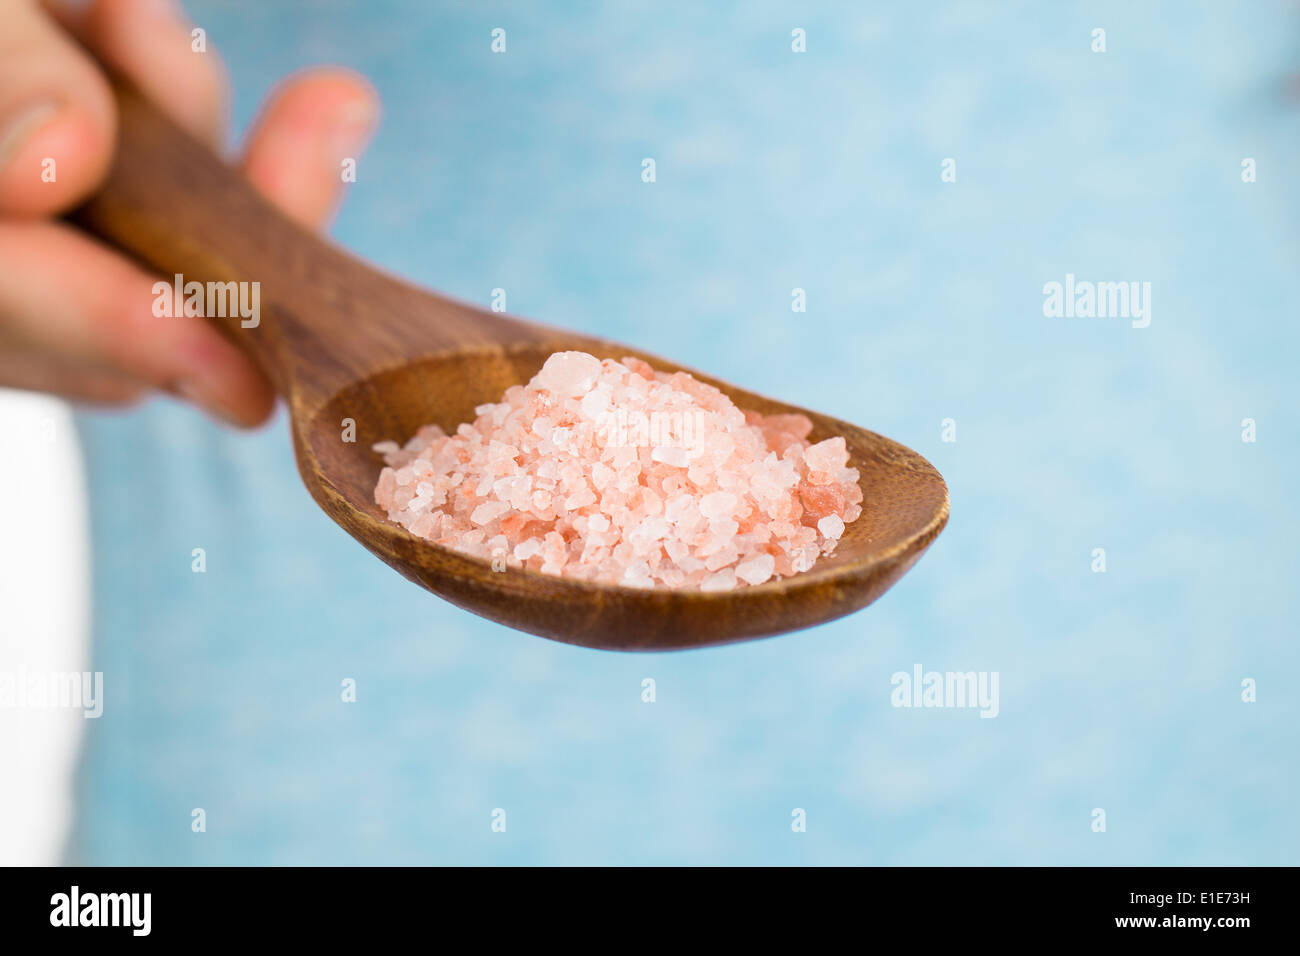 A hand holding a wooden spoon with Himalayan rock salt. Stock Photo